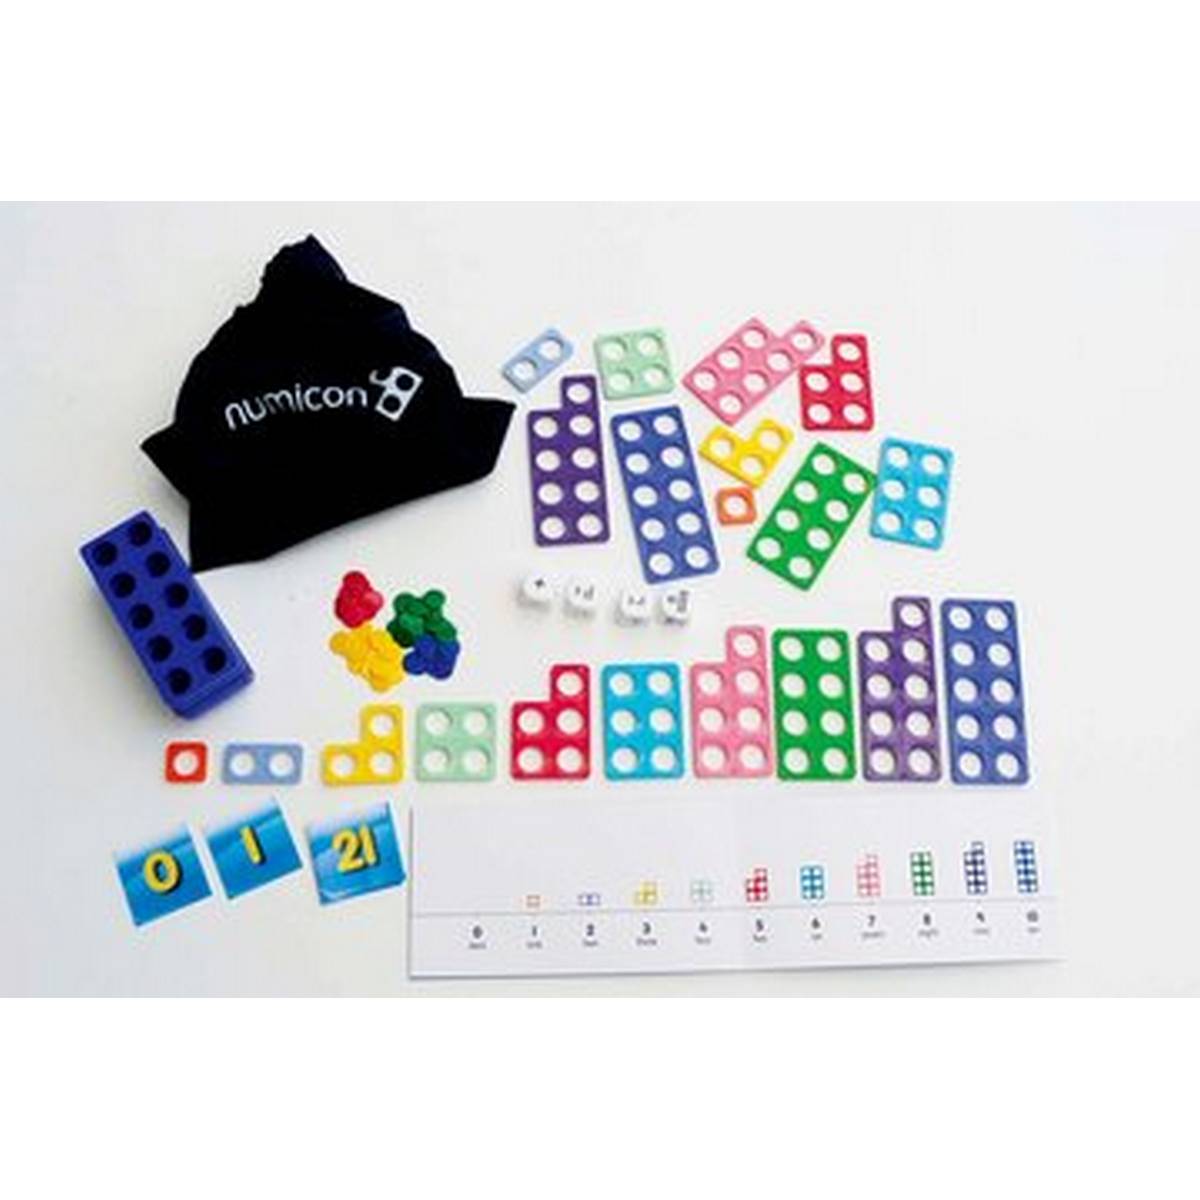 Numicon Homework Activities Intervention Resource - 'Maths Bag' of resources per pupil